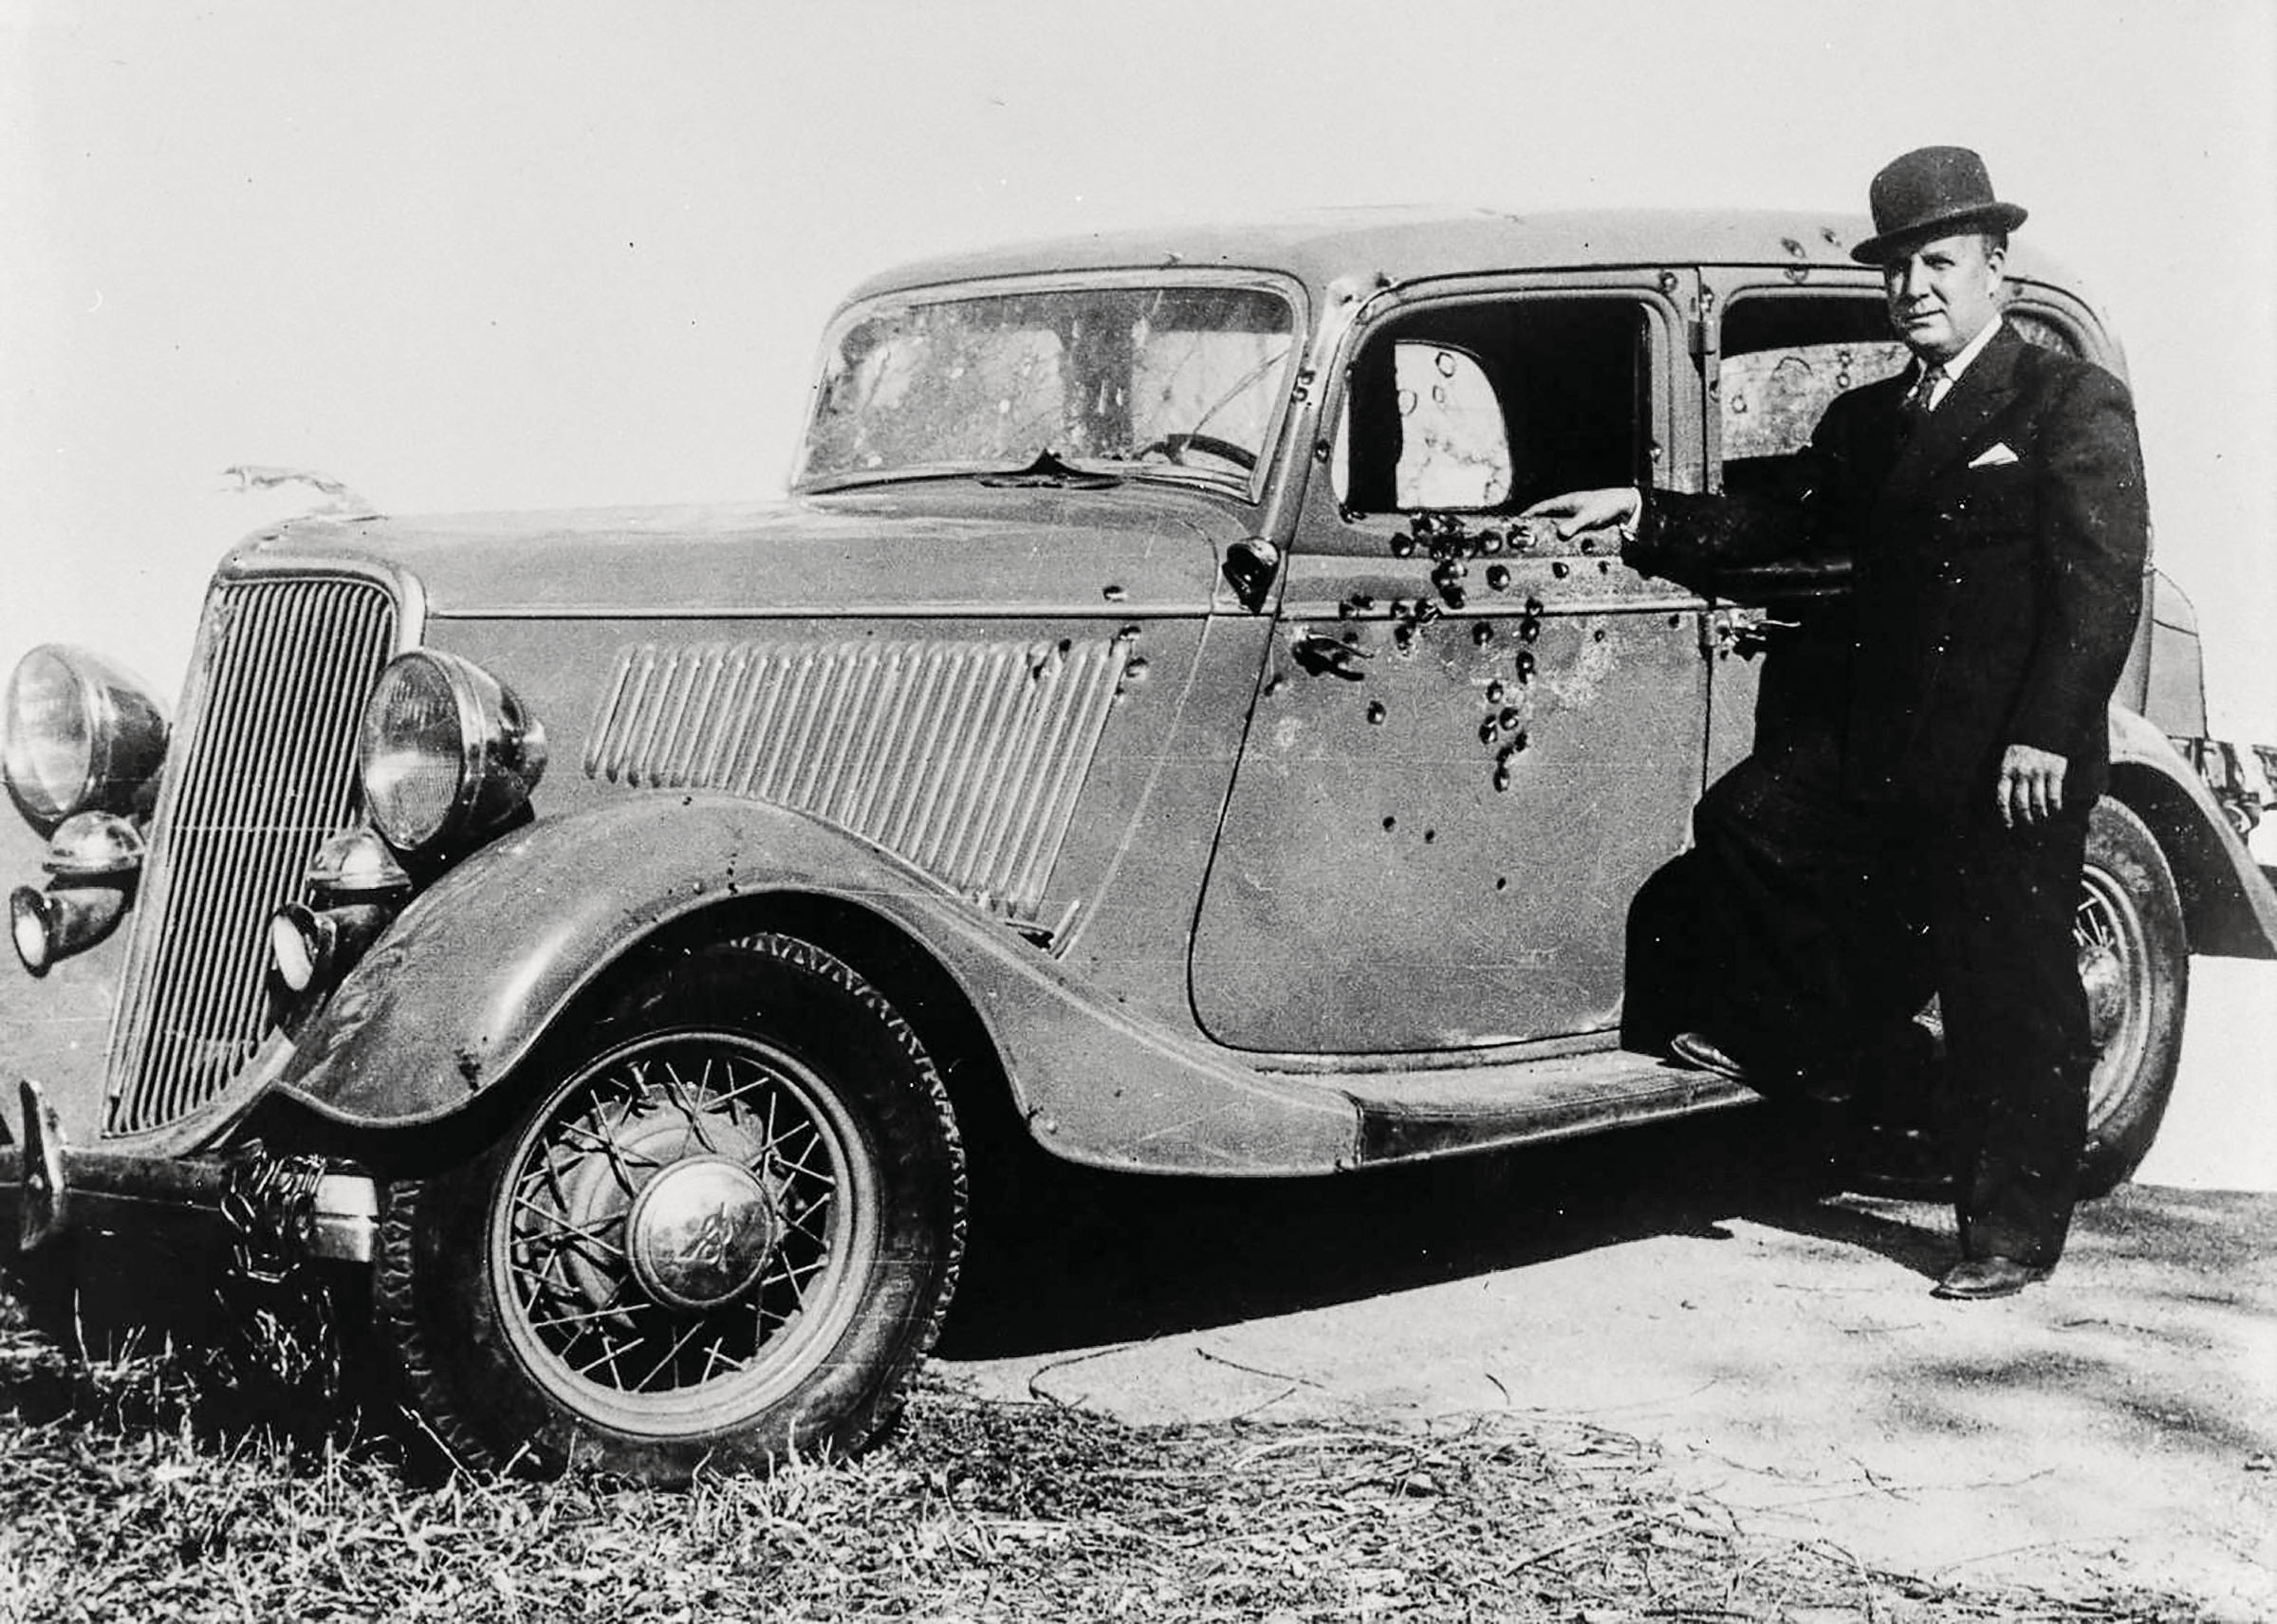 A man in a suit and hat stands next to Bonnie and Clyde's V-8 Ford covered in bullet holes